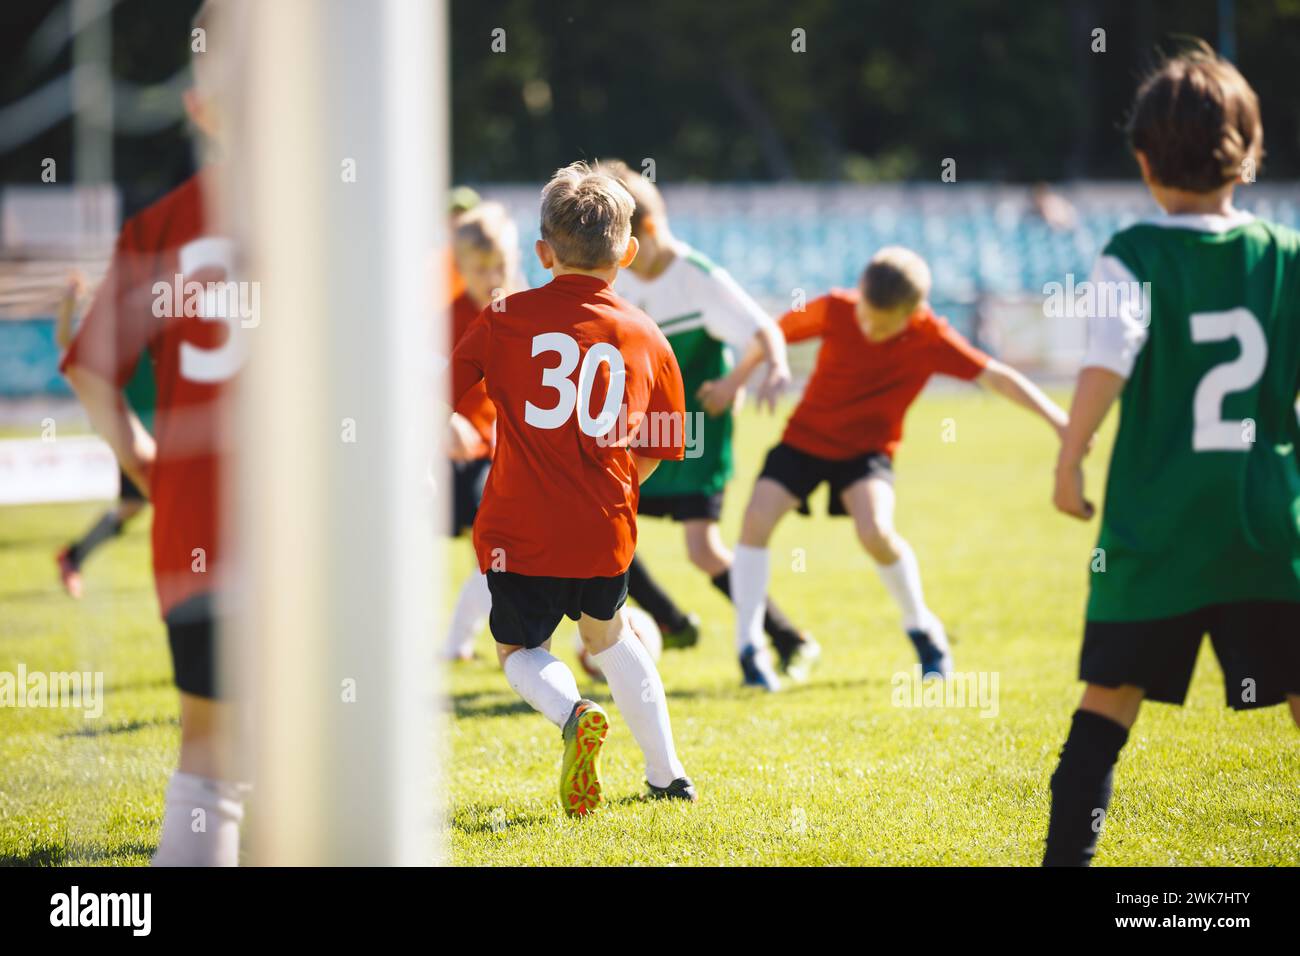 Group of School Boys Play Soccer Football Match With Friends. Youth Professionals Soccer Kids Kicking Ball on Grass Pitch. CHildren in Red an Green Je Stock Photo